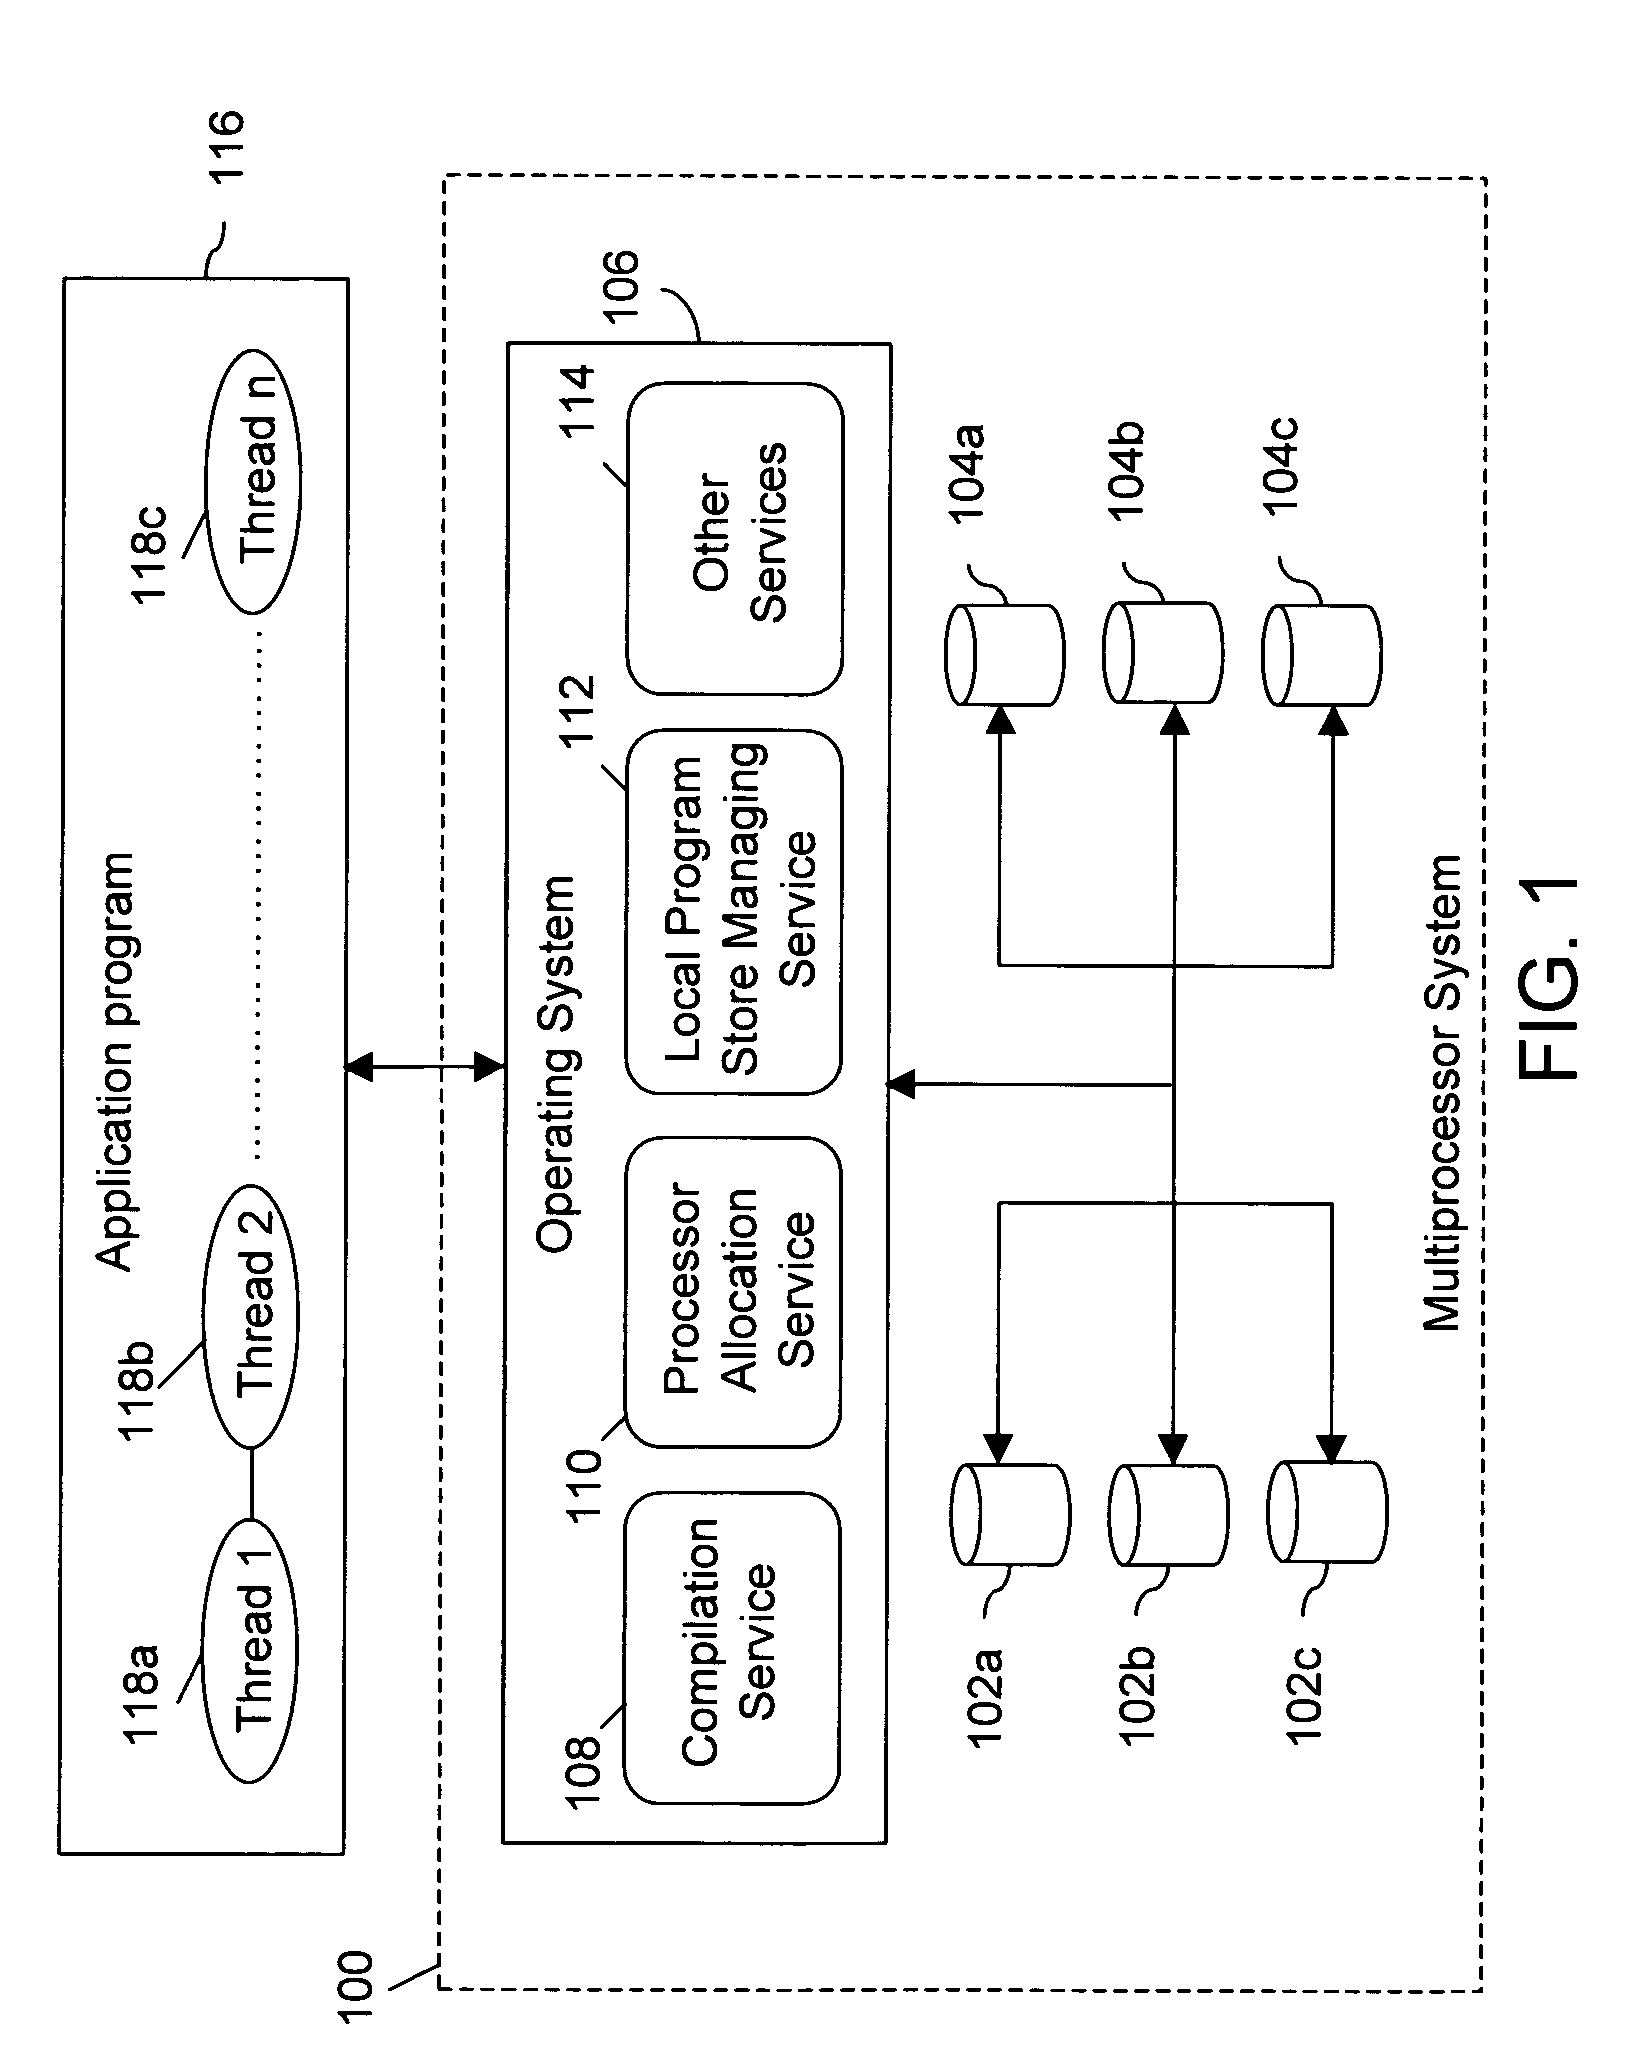 Method and system for allocation of special purpose computing resources in a multiprocessor system